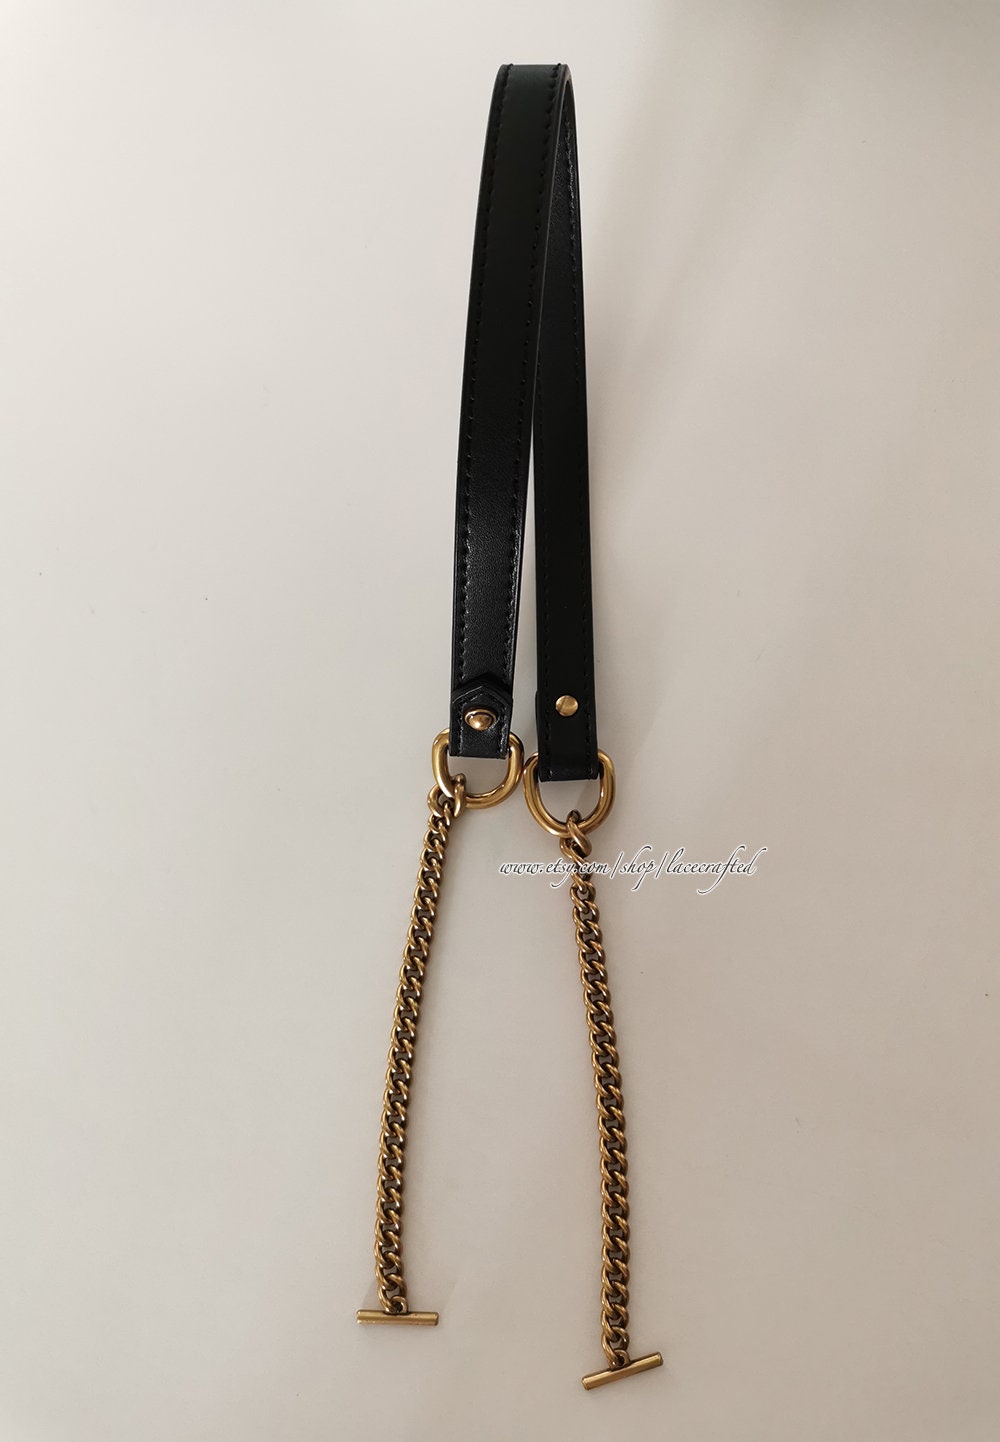 SUPERFINDINGS 1pc Black PU Leather Bag Straps 16.5x0.8inch Purse  Replacement Strap Adjustable Replacement Strap with Light Gold Iron Chains  and D